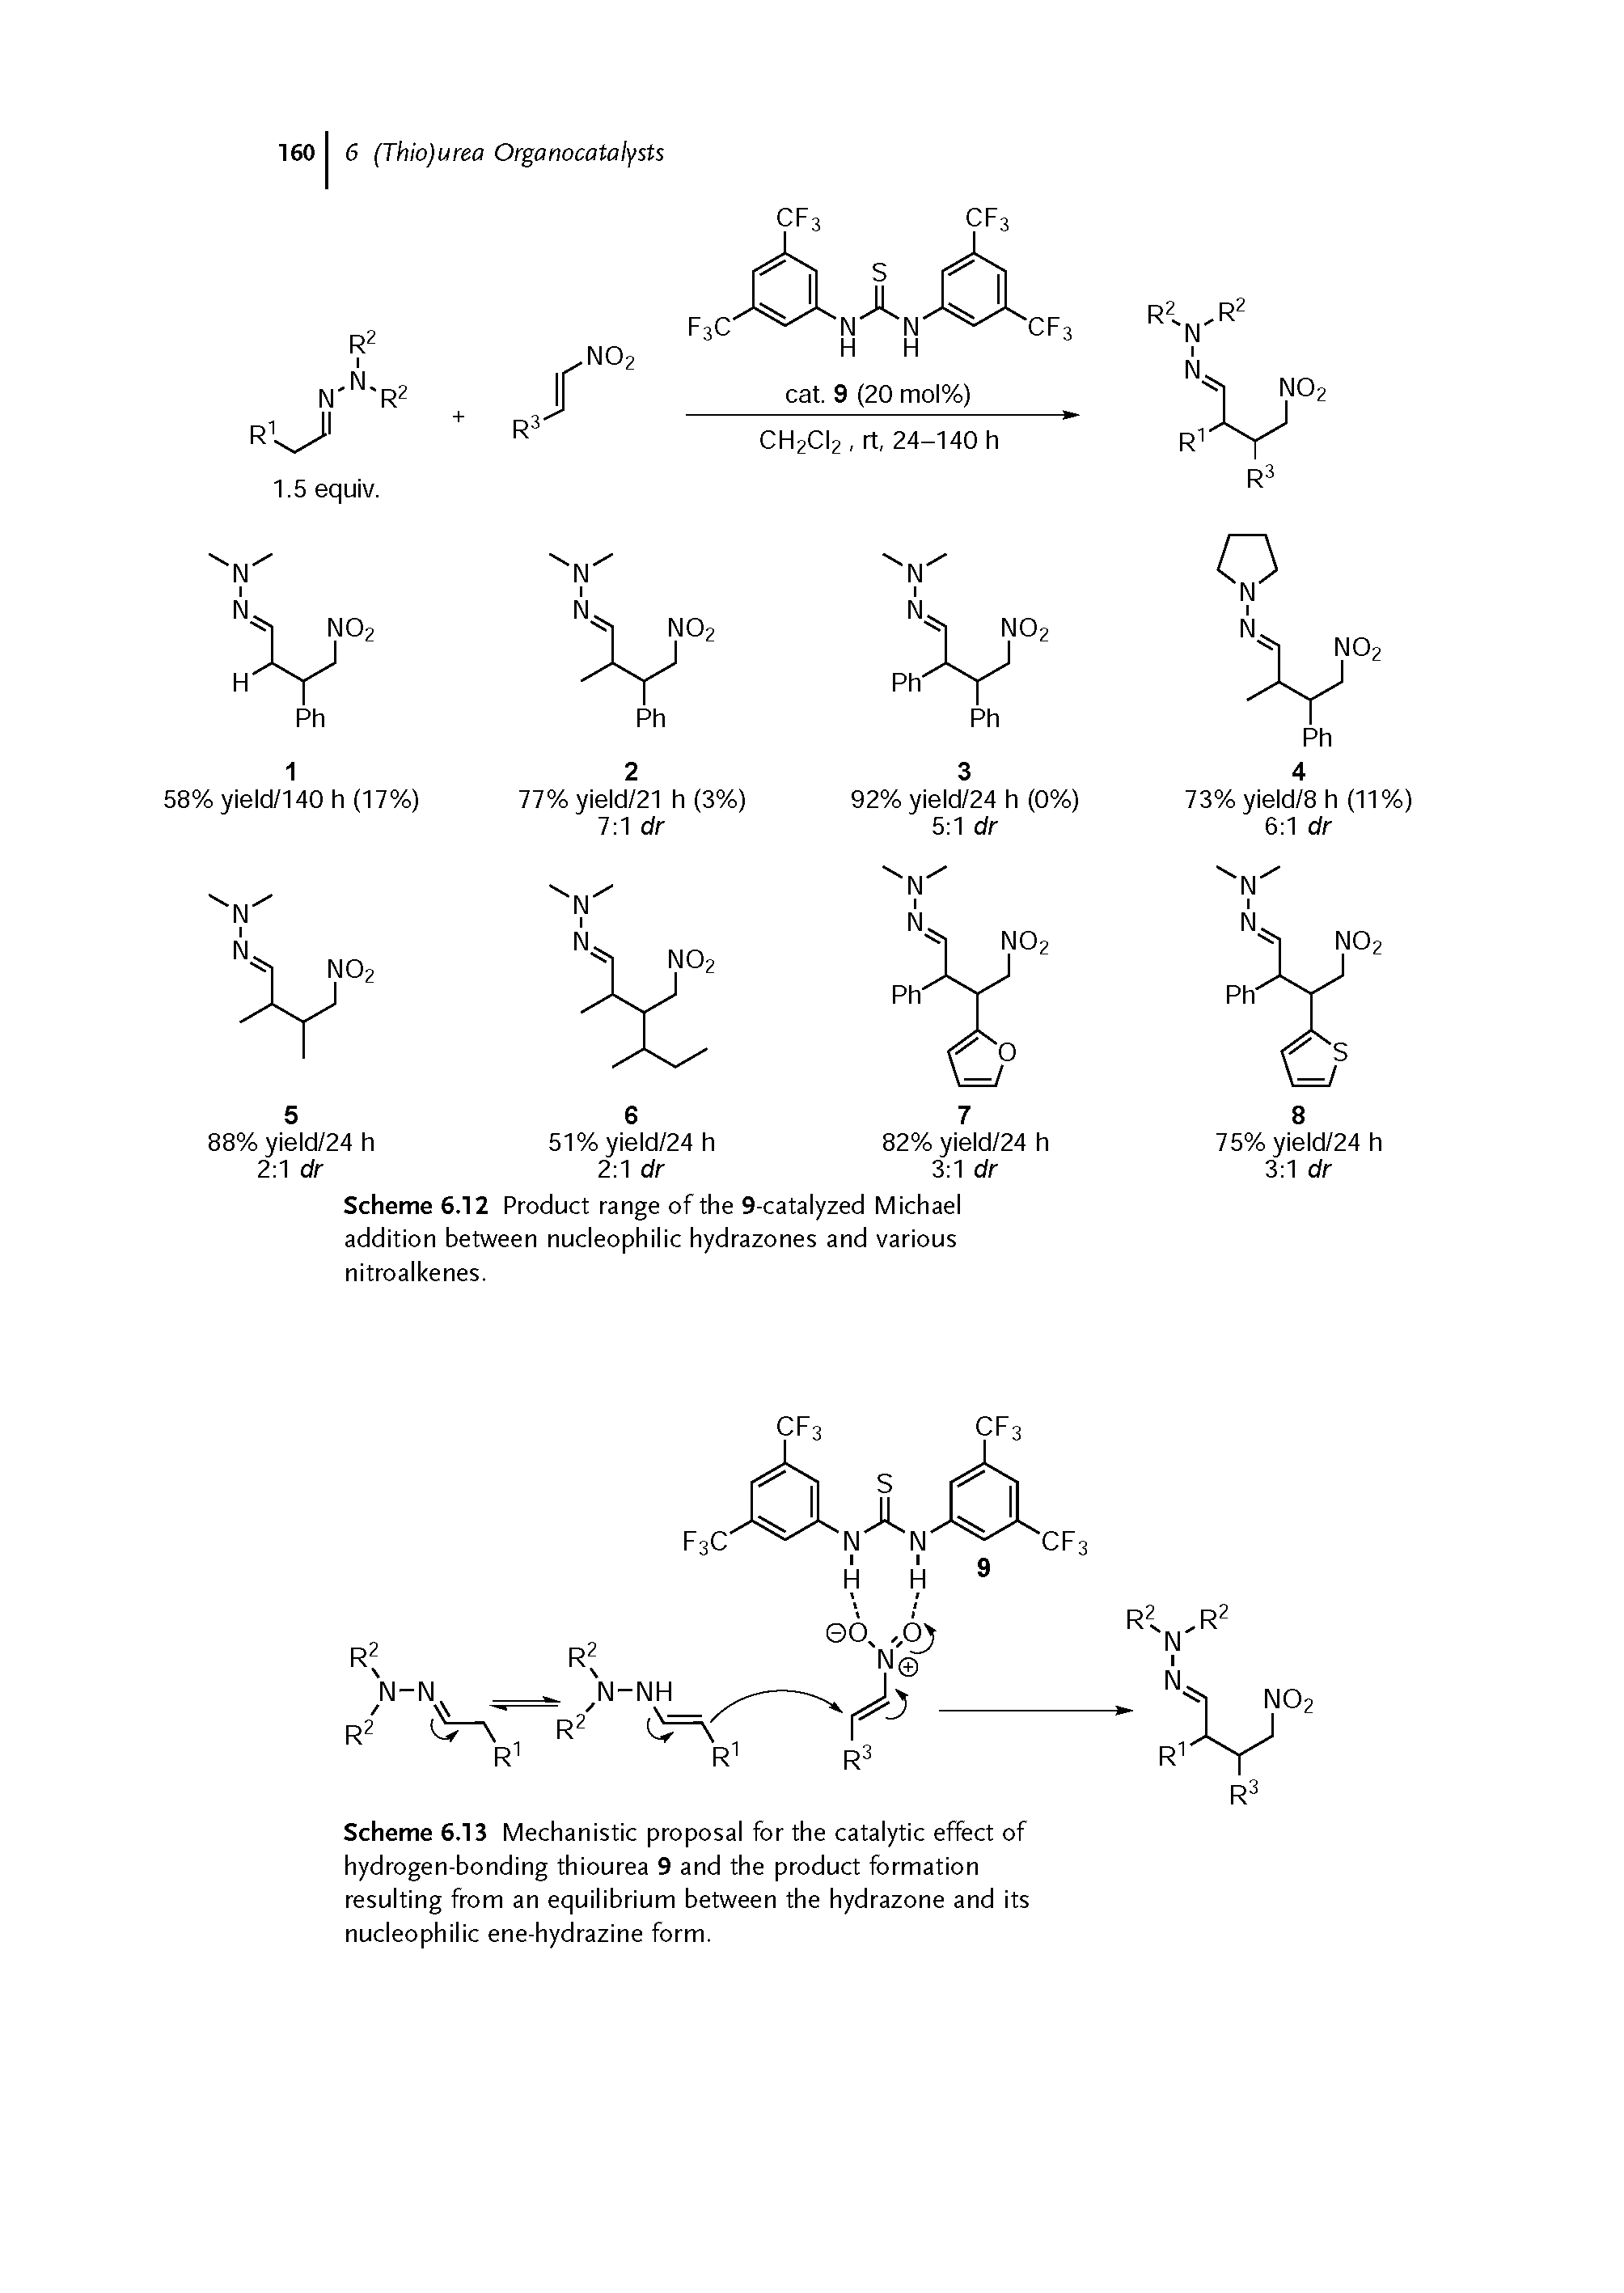 Scheme 6.13 Mechanistic proposal for the catalytic effect of hydrogen-bonding thiourea 9 and the product formation resulting from an equilibrium between the hydrazone and its nucleophilic ene-hydrazine form.